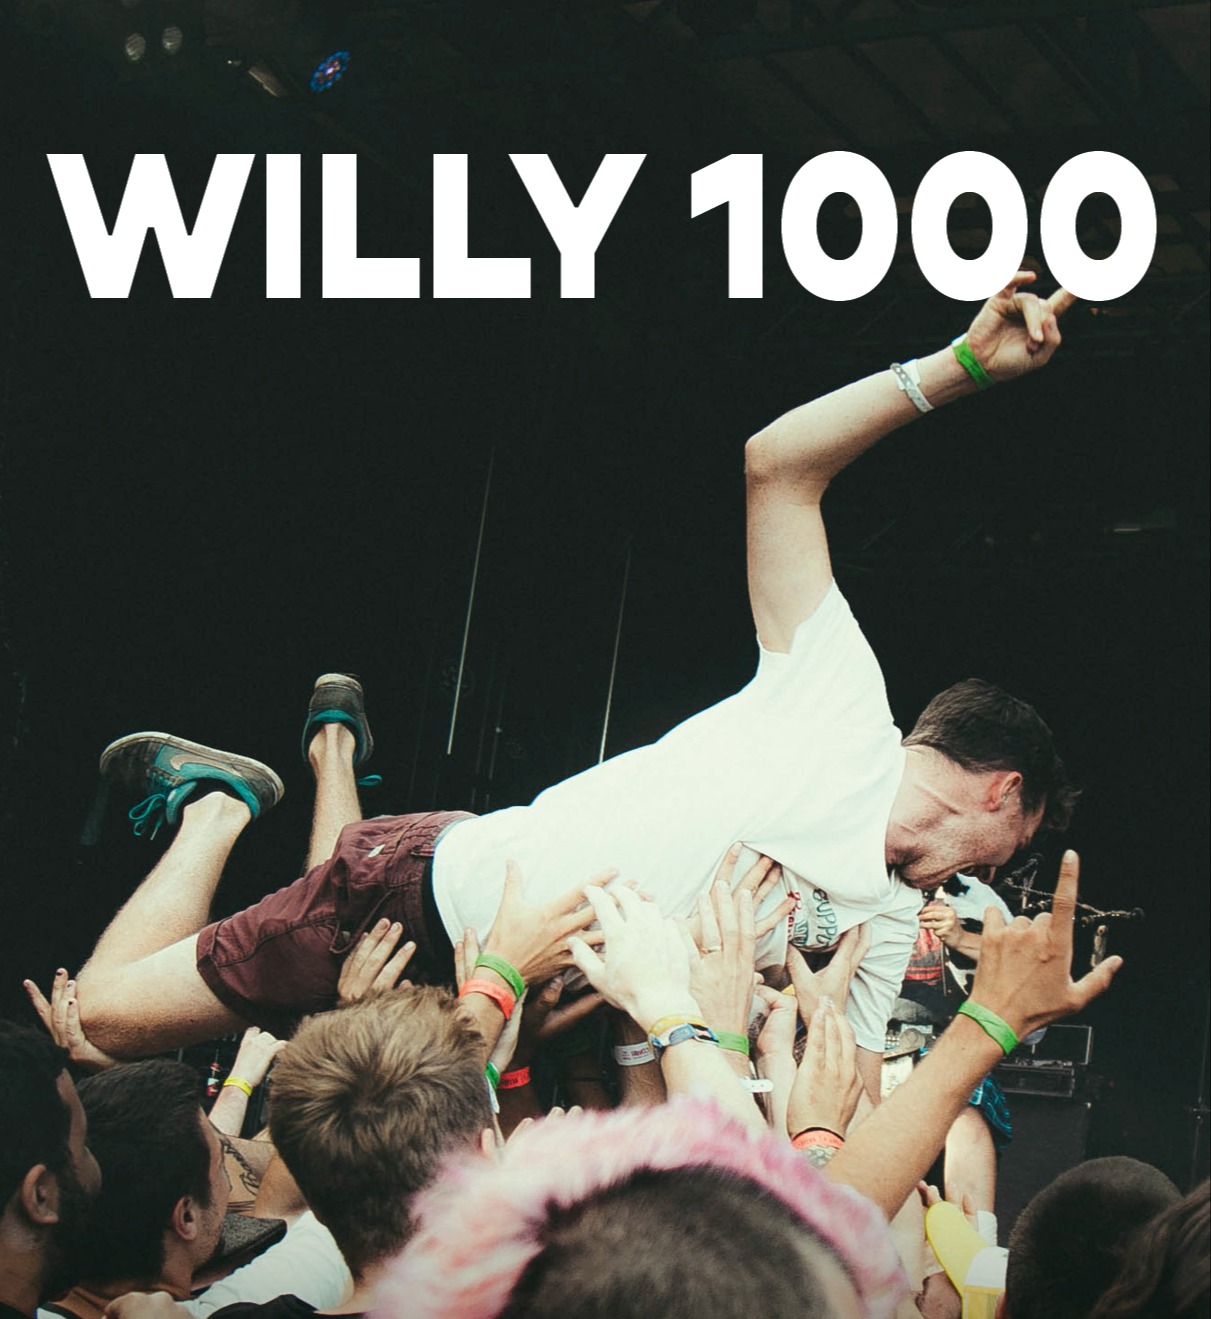 Willy 1000